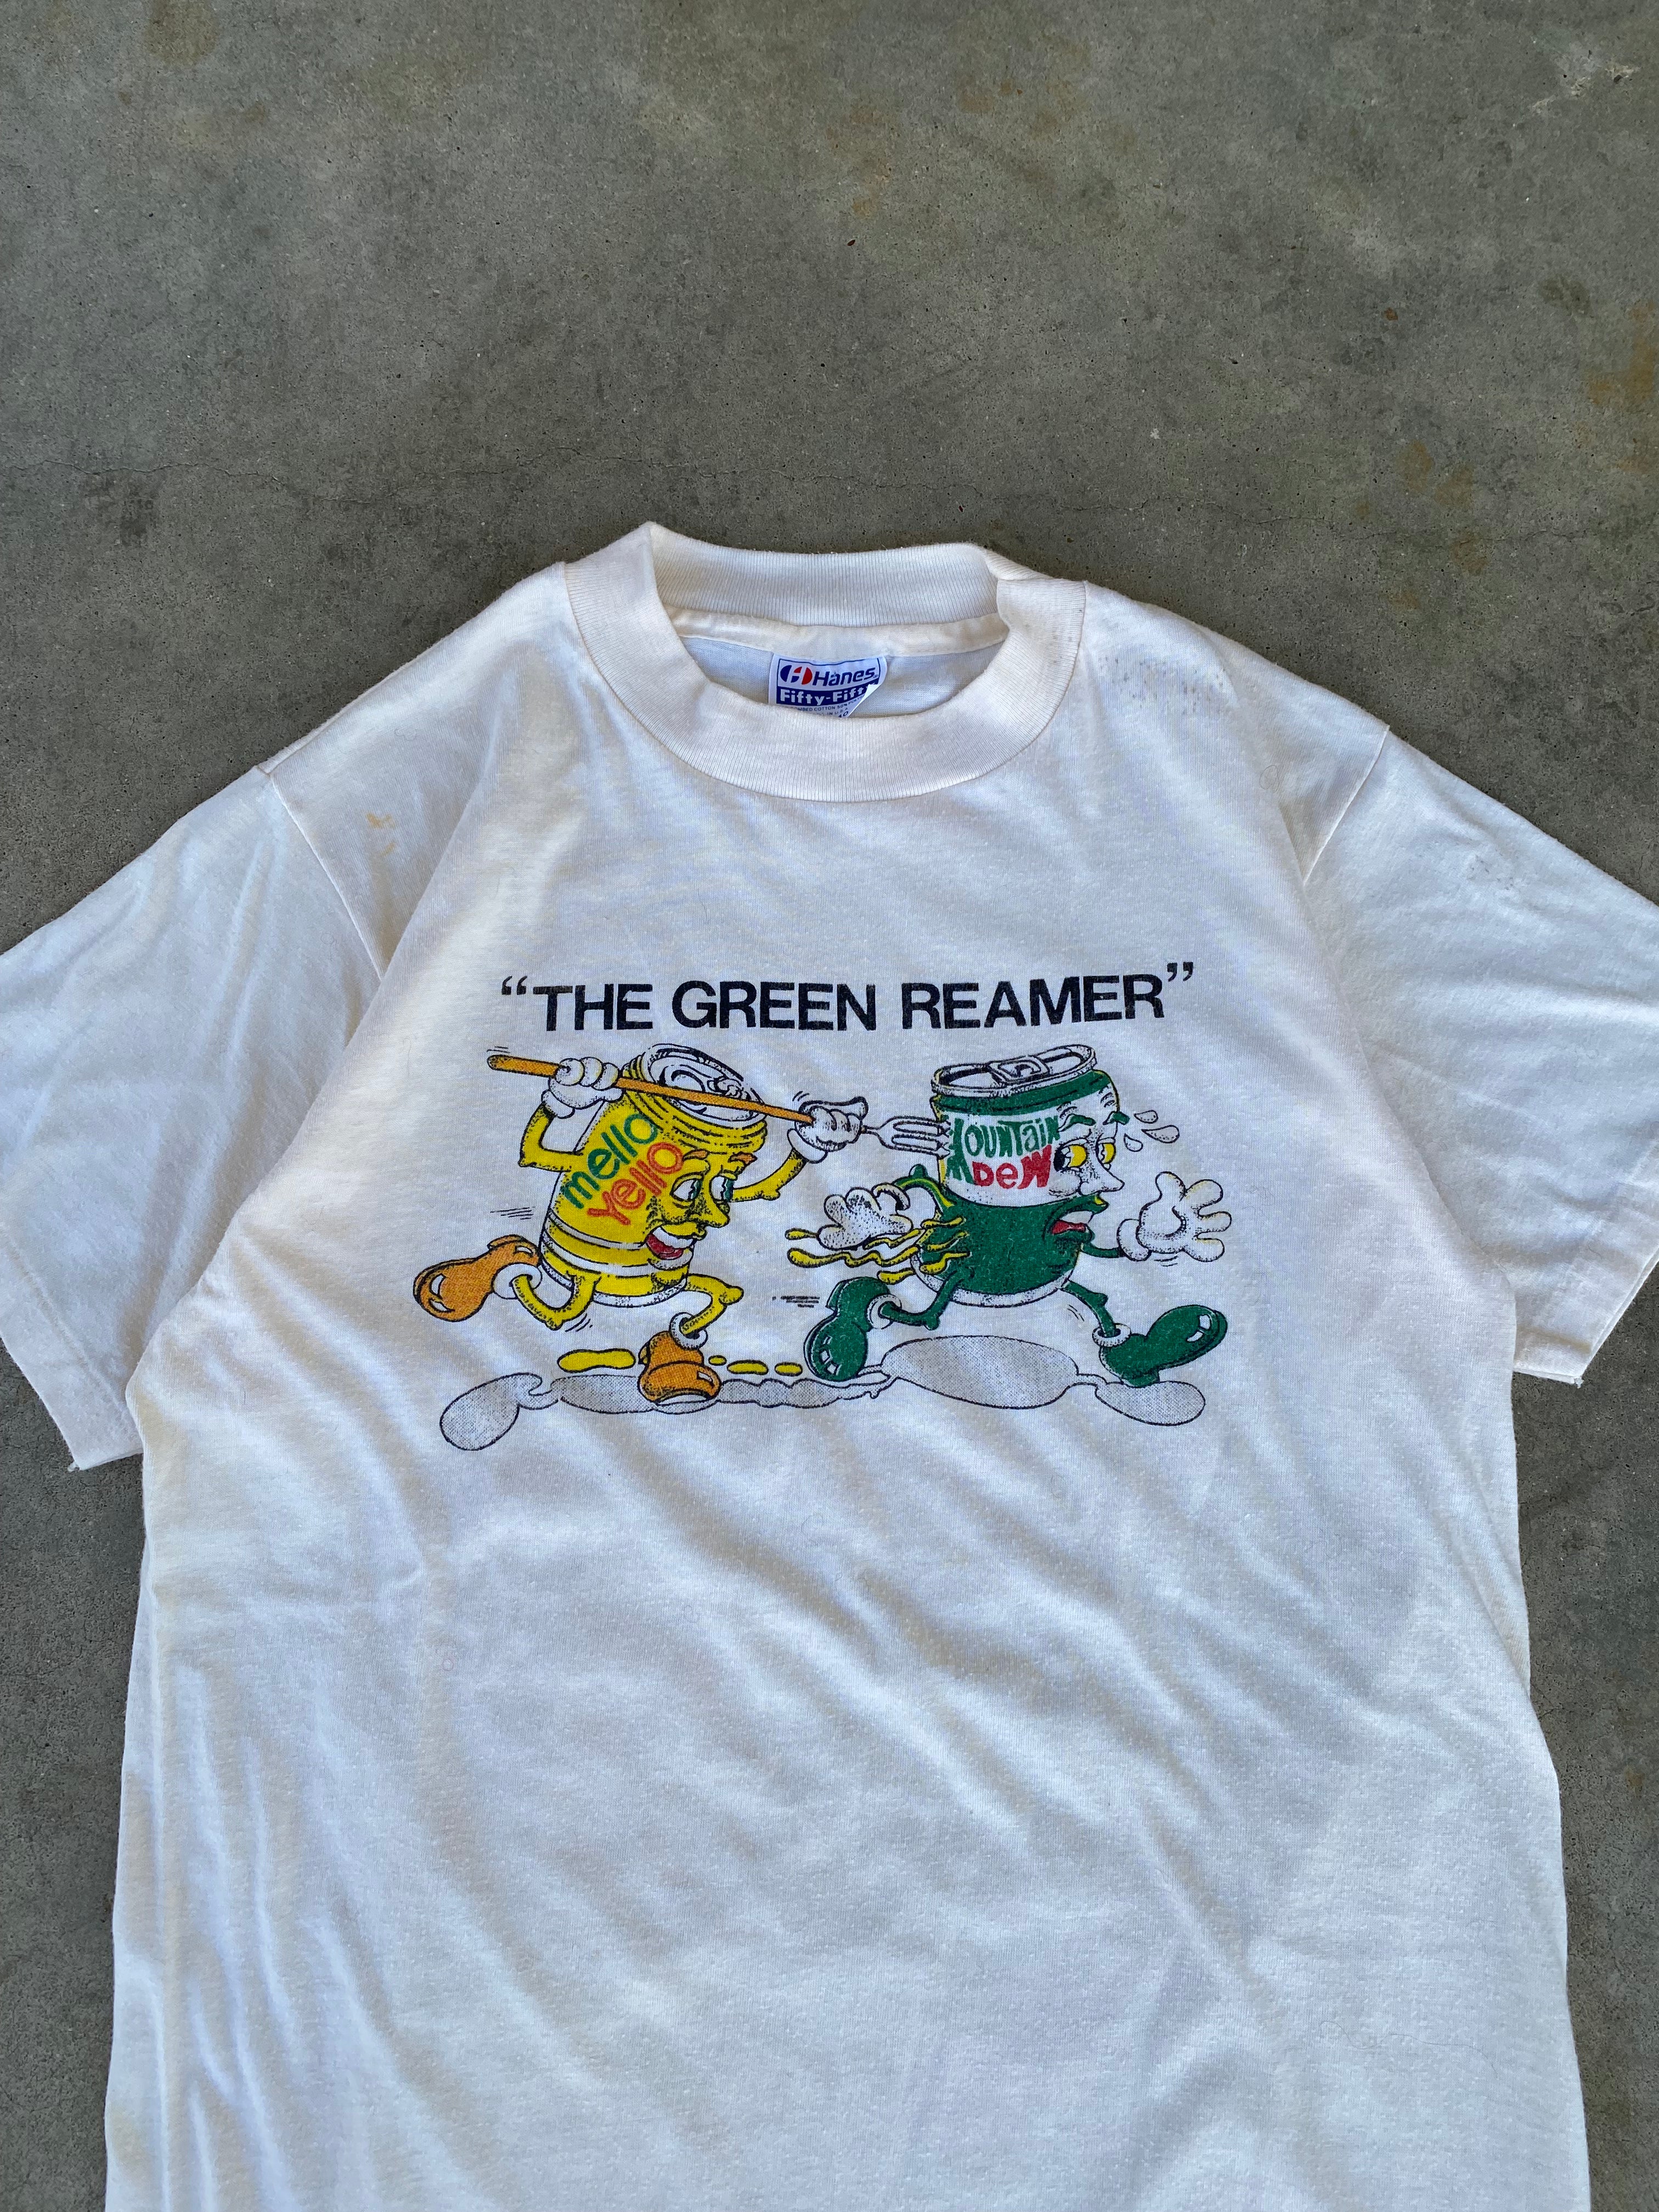 1980s “The Gream Reamer” T-Shirt (S)